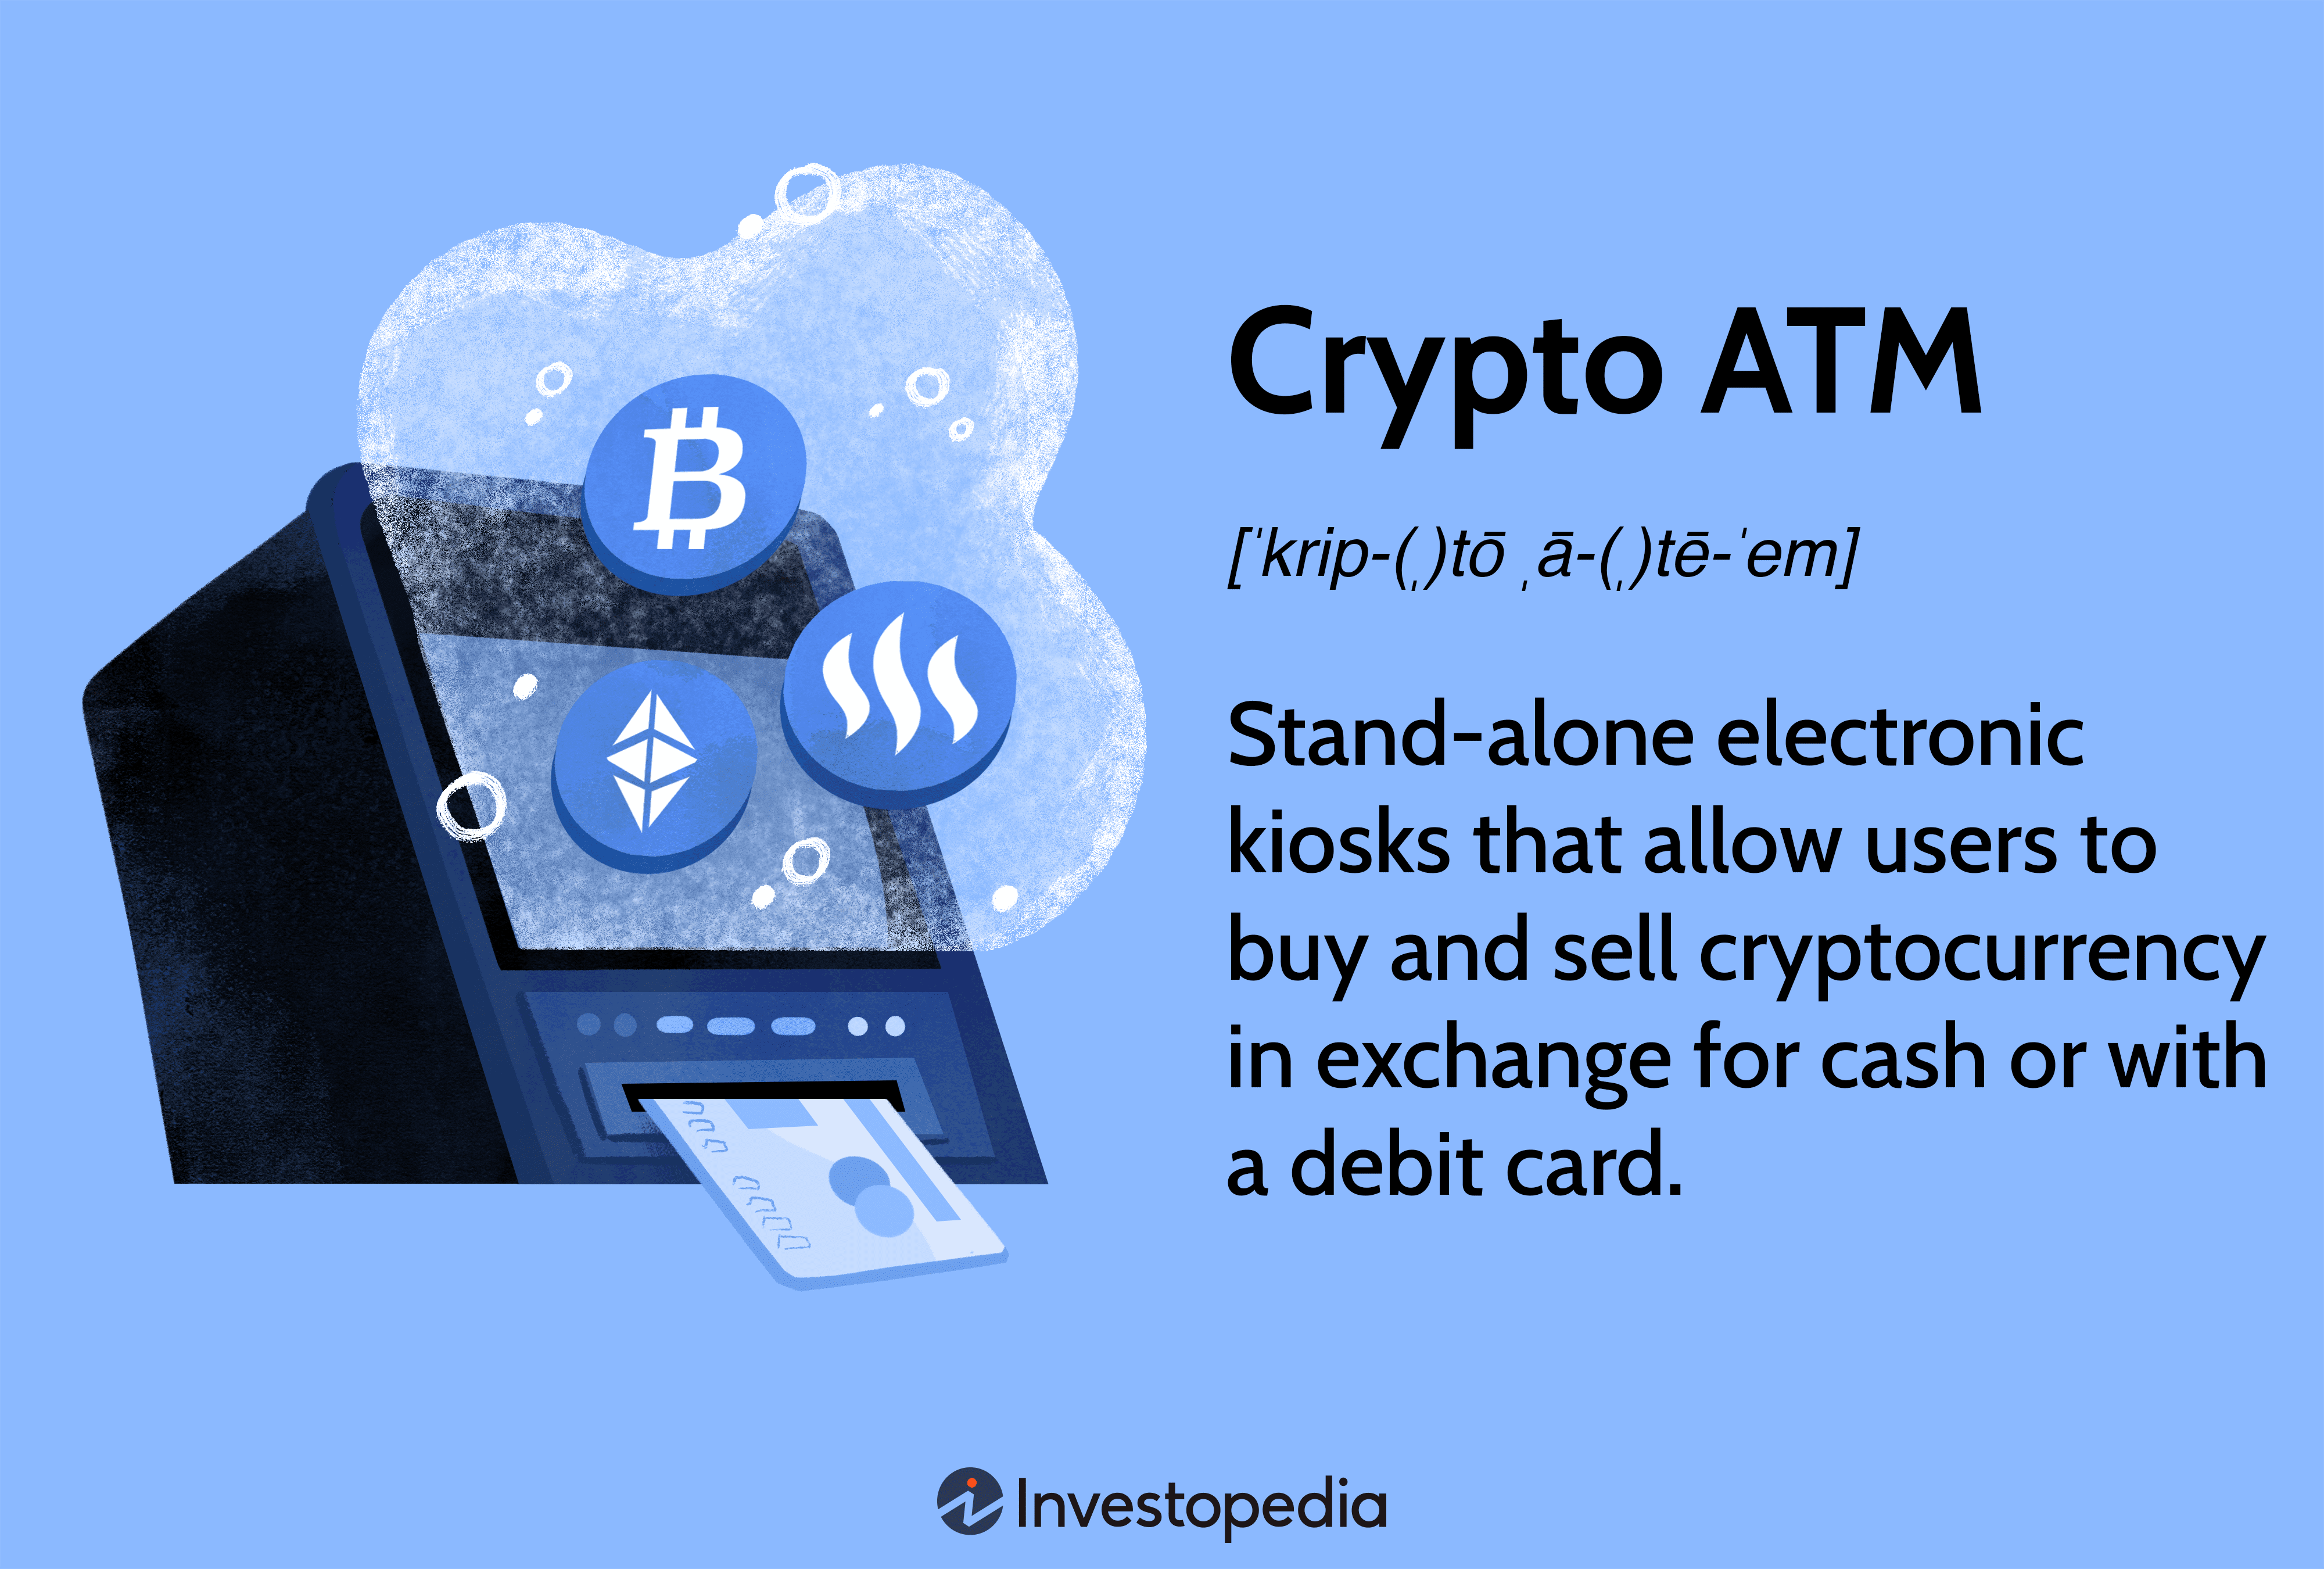 Crypto ATM: Stand-alone electronic kiosks that allow users to buy and sell cryptocurrency in exchange for cash or with a debit card.